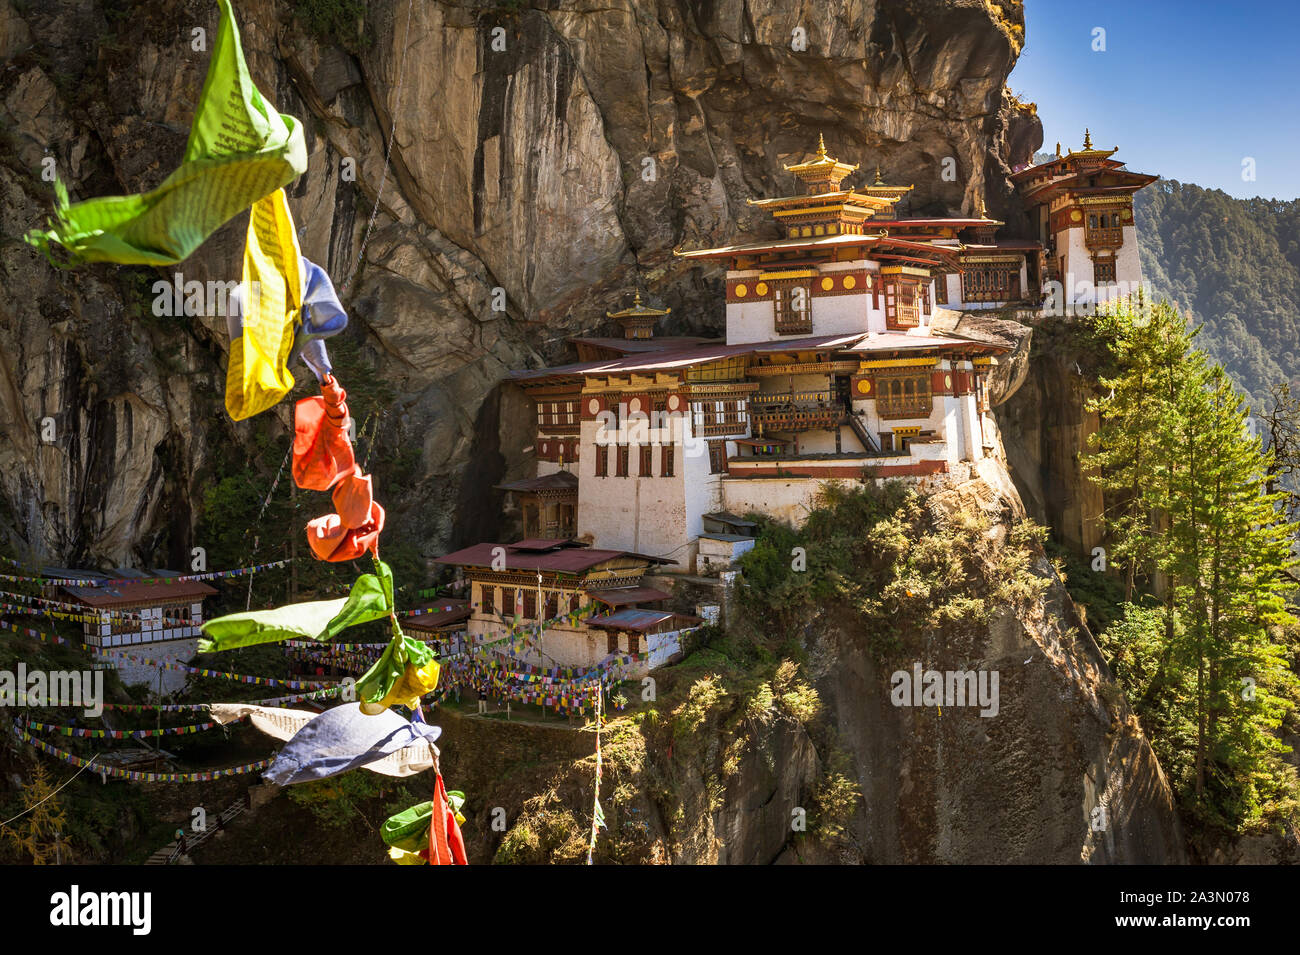 Flying prayer flags at Paro Taktsang. Known as Tiger's Nest, it is a prominent Buddhist sacred site in Bhutan. Stock Photo